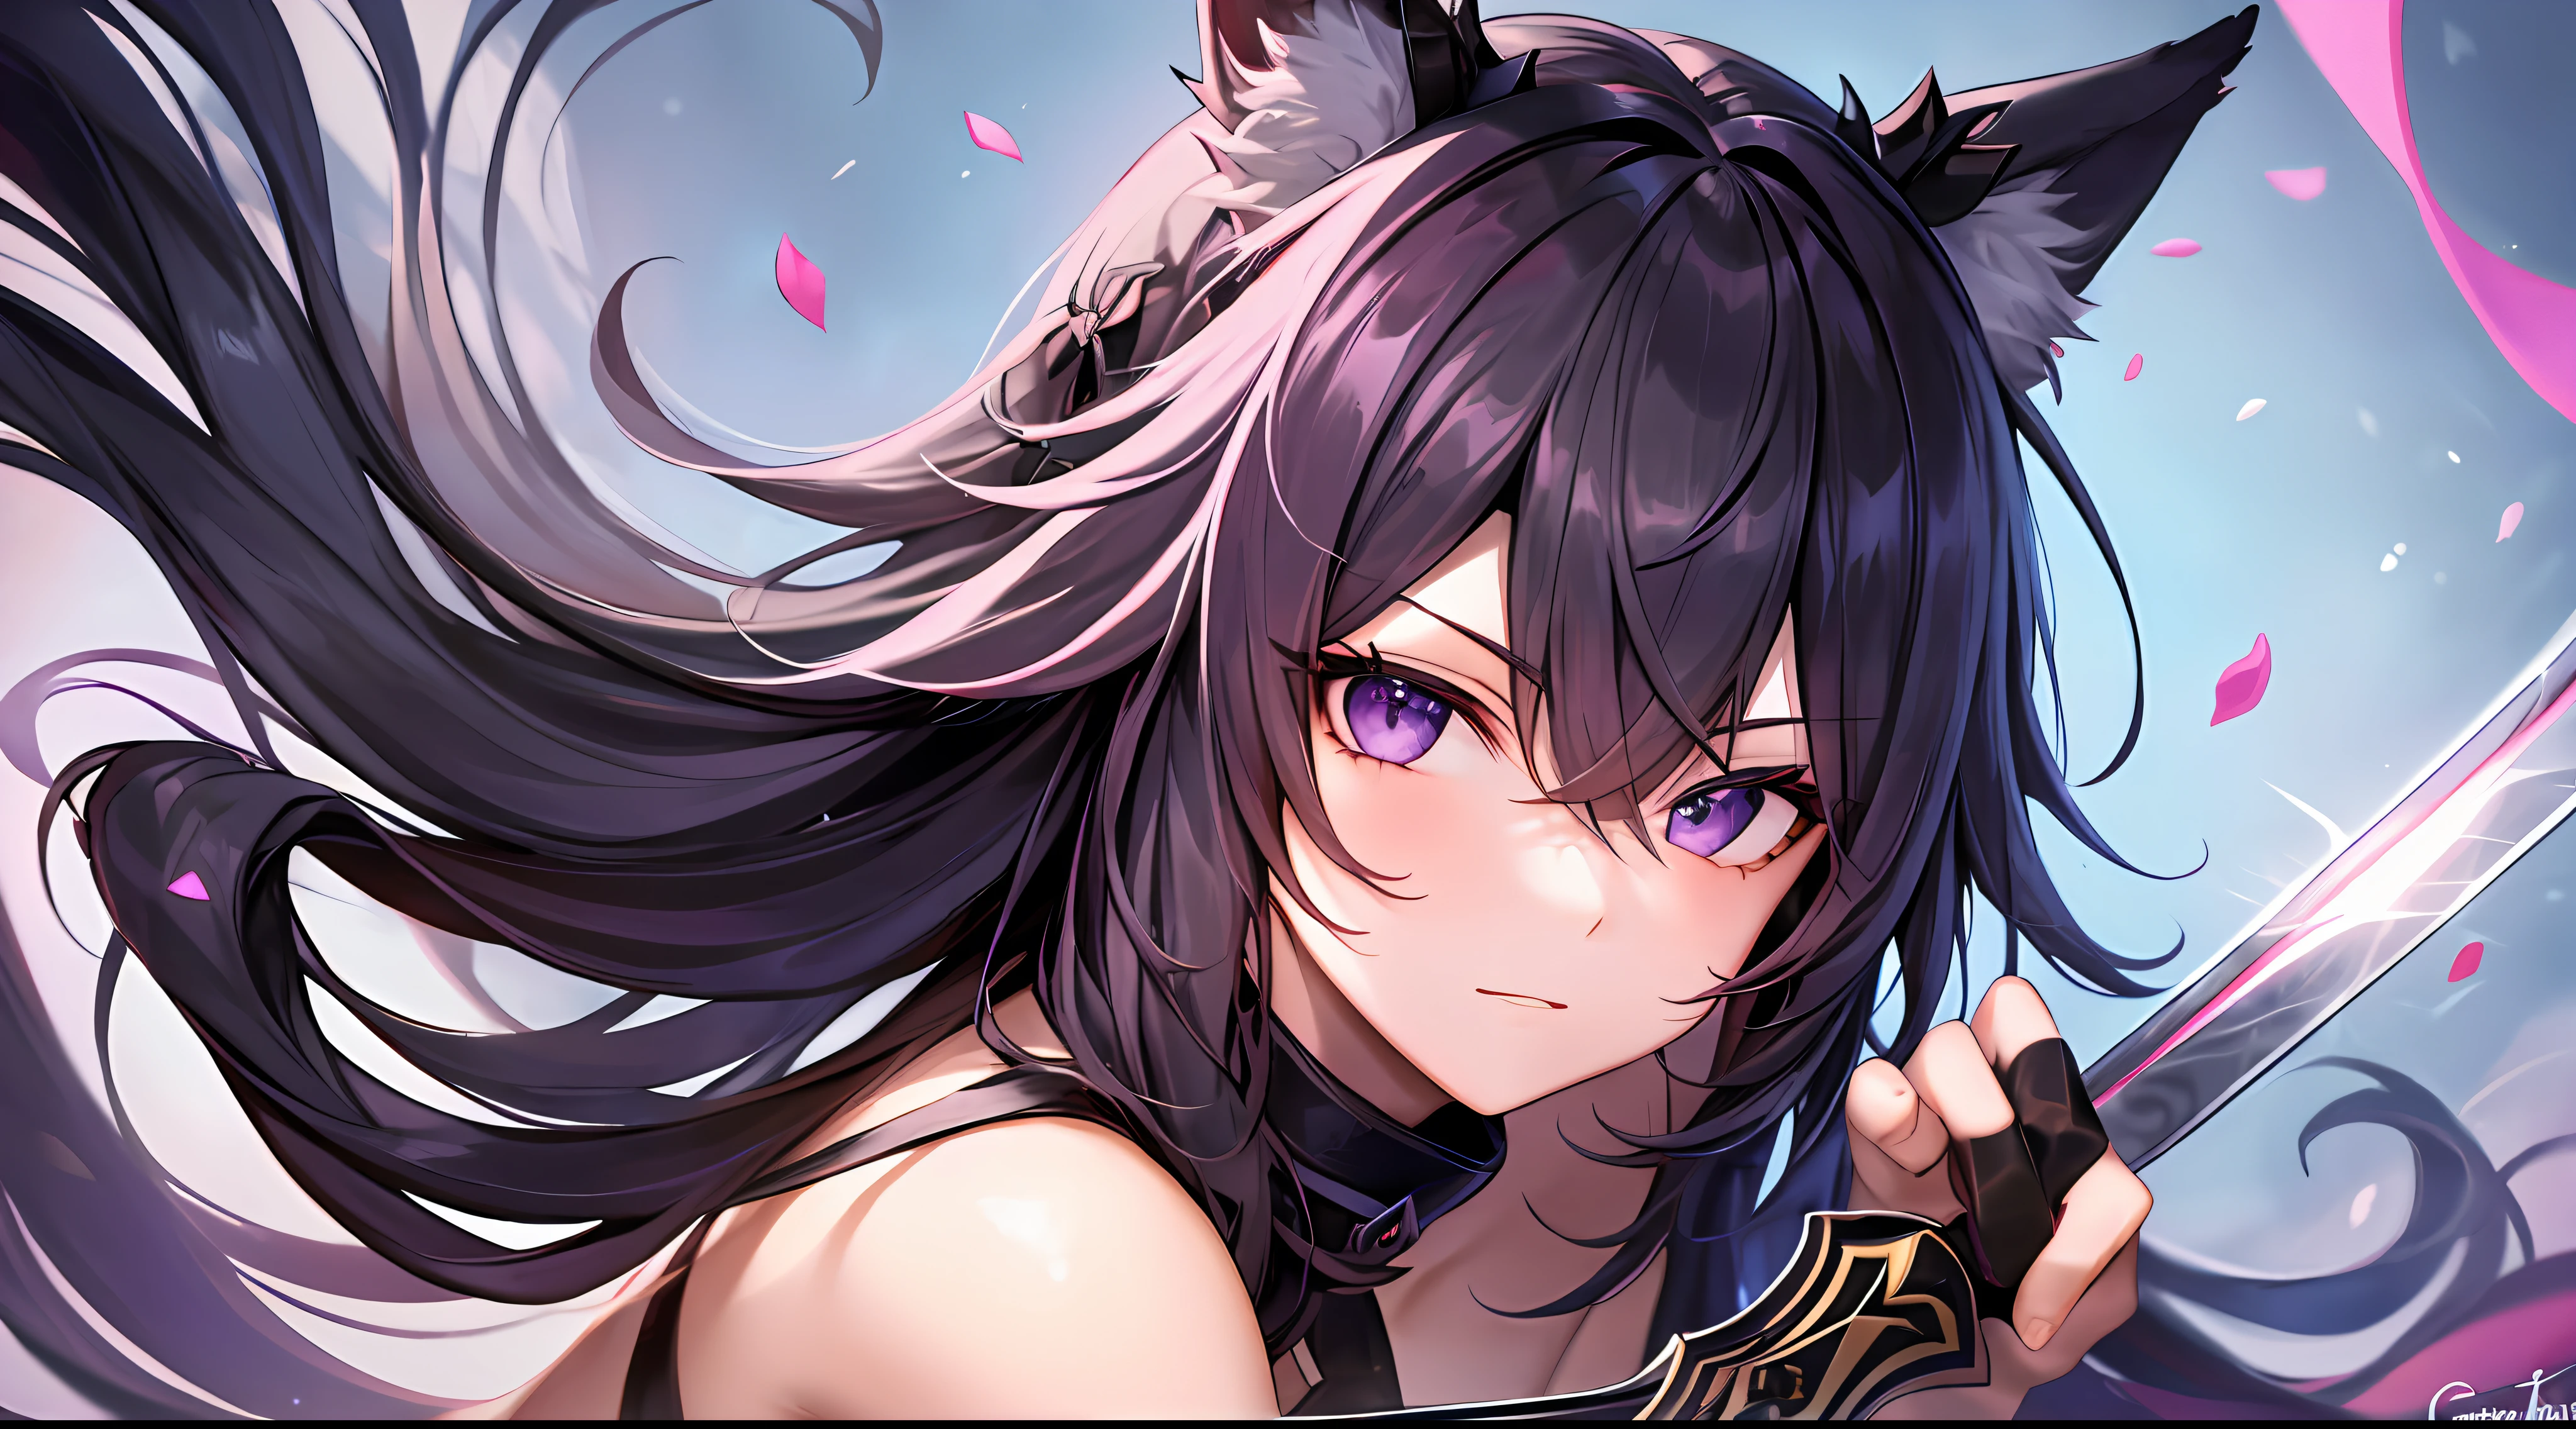 Mast, best quality, 1 girl, eula \ (Genshin Impact), black hair, purple eyes, long hair, headband, hair accessories, looking at the audience, facing viewer, eula signature weapon claymore sword, fox ears bent